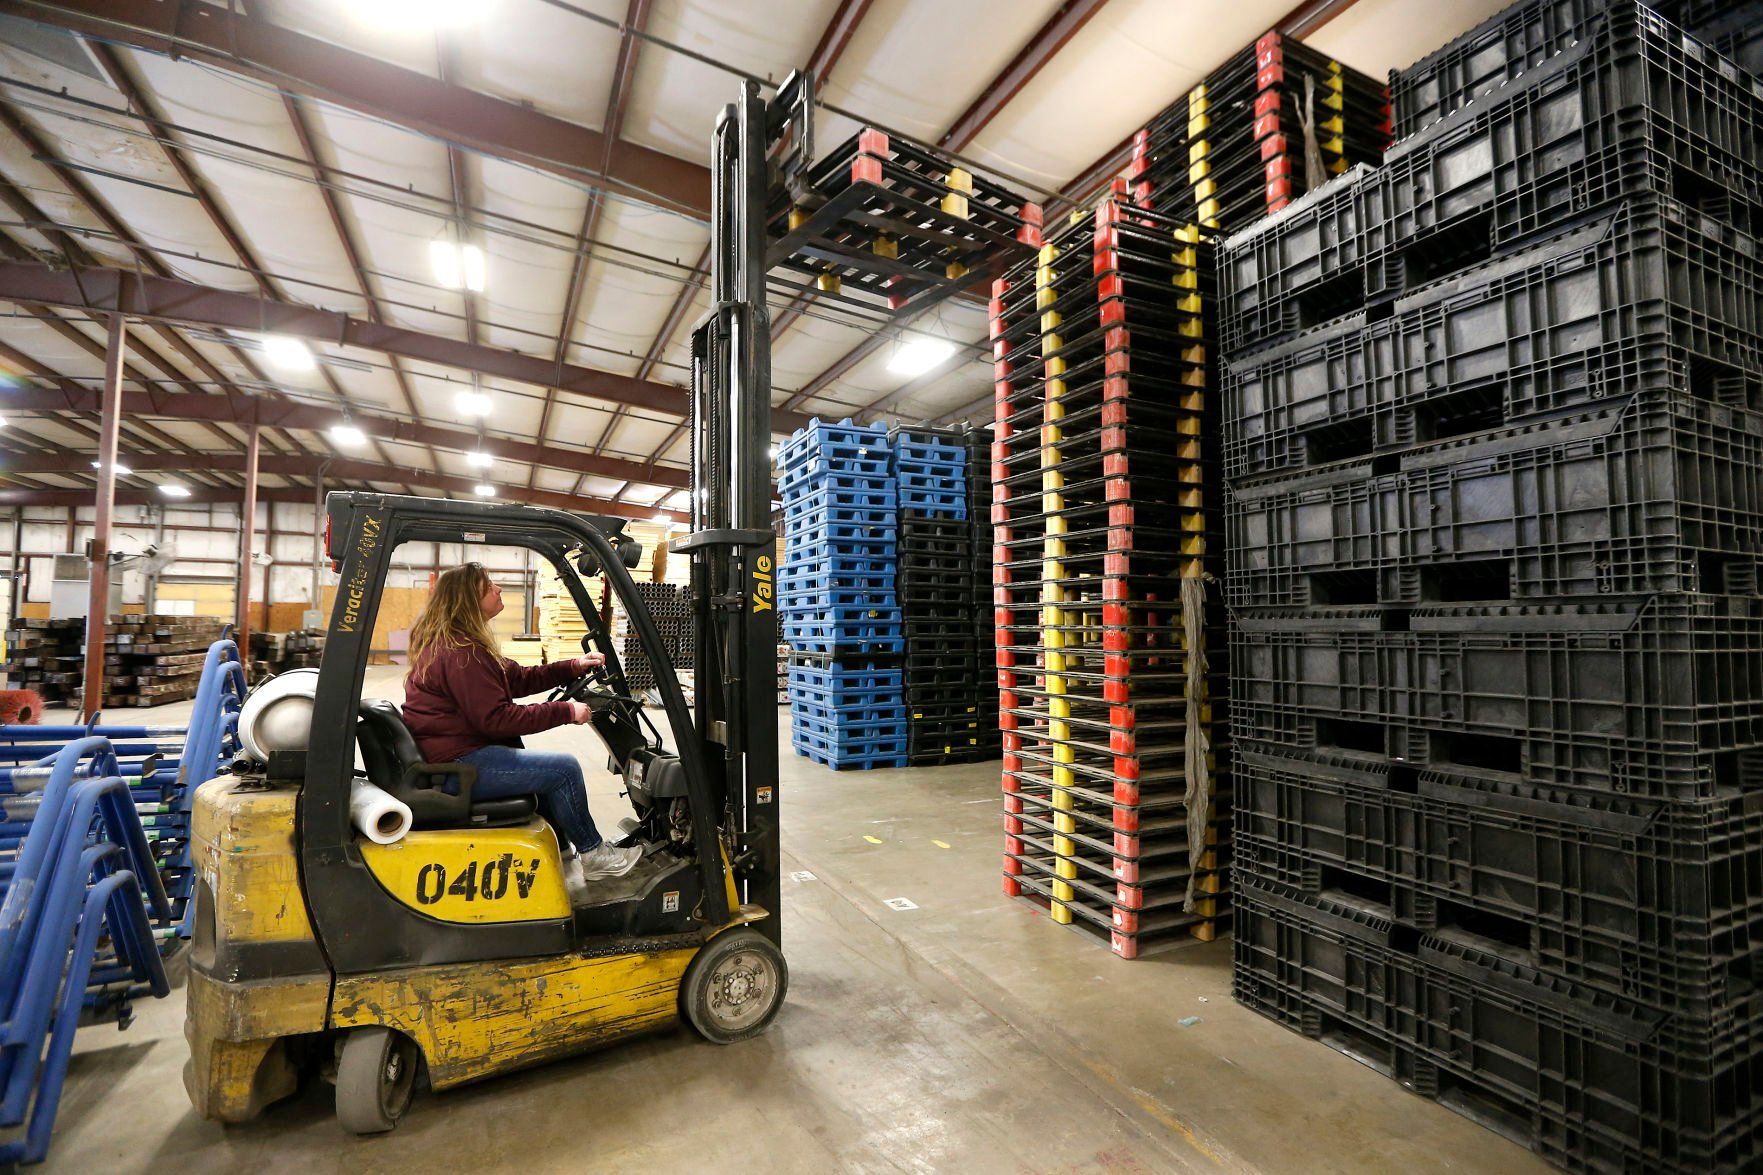 Jessi Walker, manager of Repurposed Materials in Maquoketa, Iowa, stacks up flat pallets that are among the many items for sale at the business.    PHOTO CREDIT: Dave Kettering
Telegraph Herald